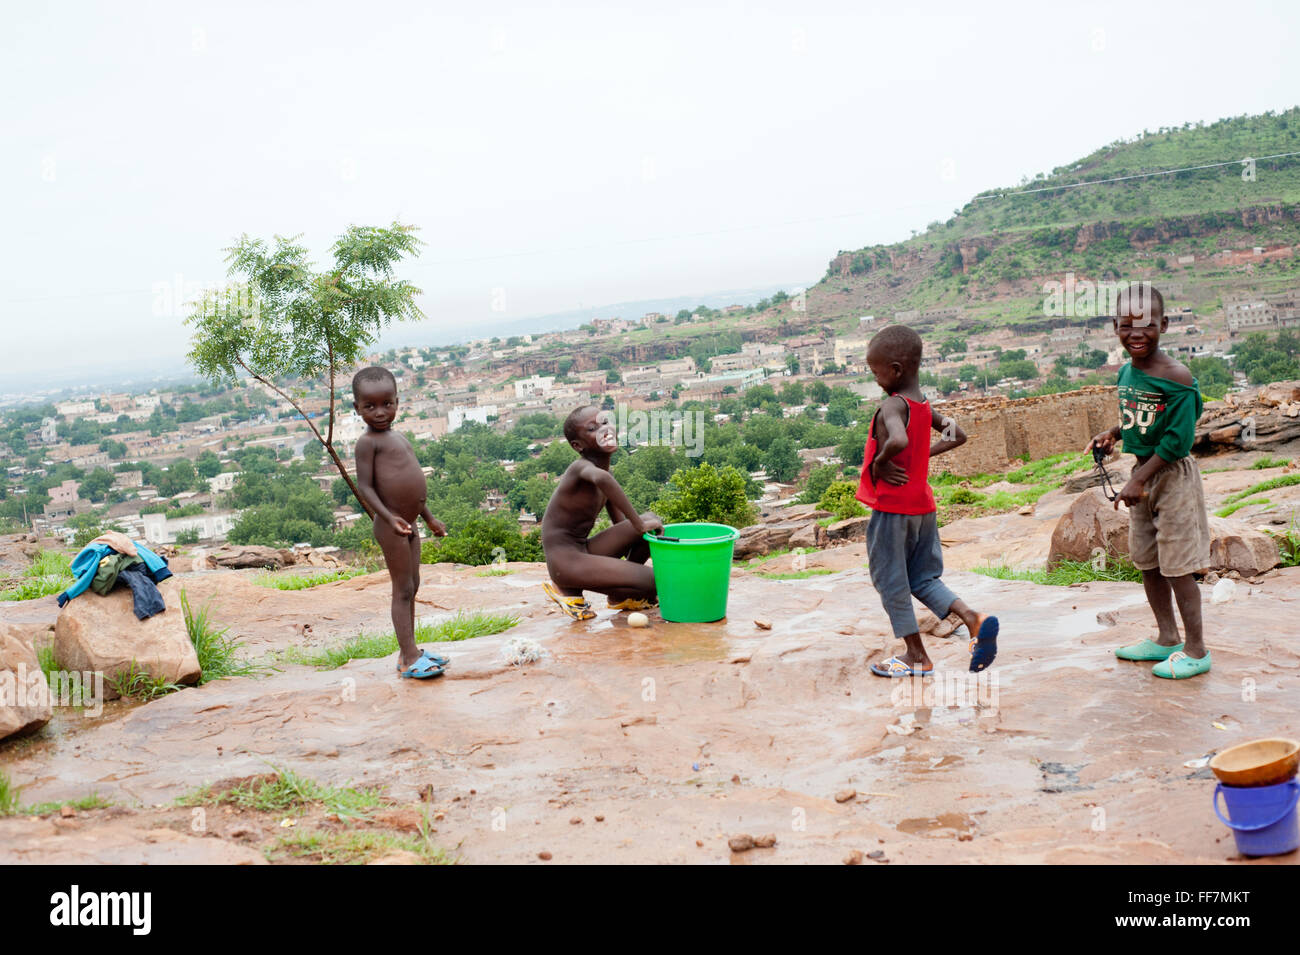 Mali, Africa - People carrying water for drinking in a village near Bamako Stock Photo